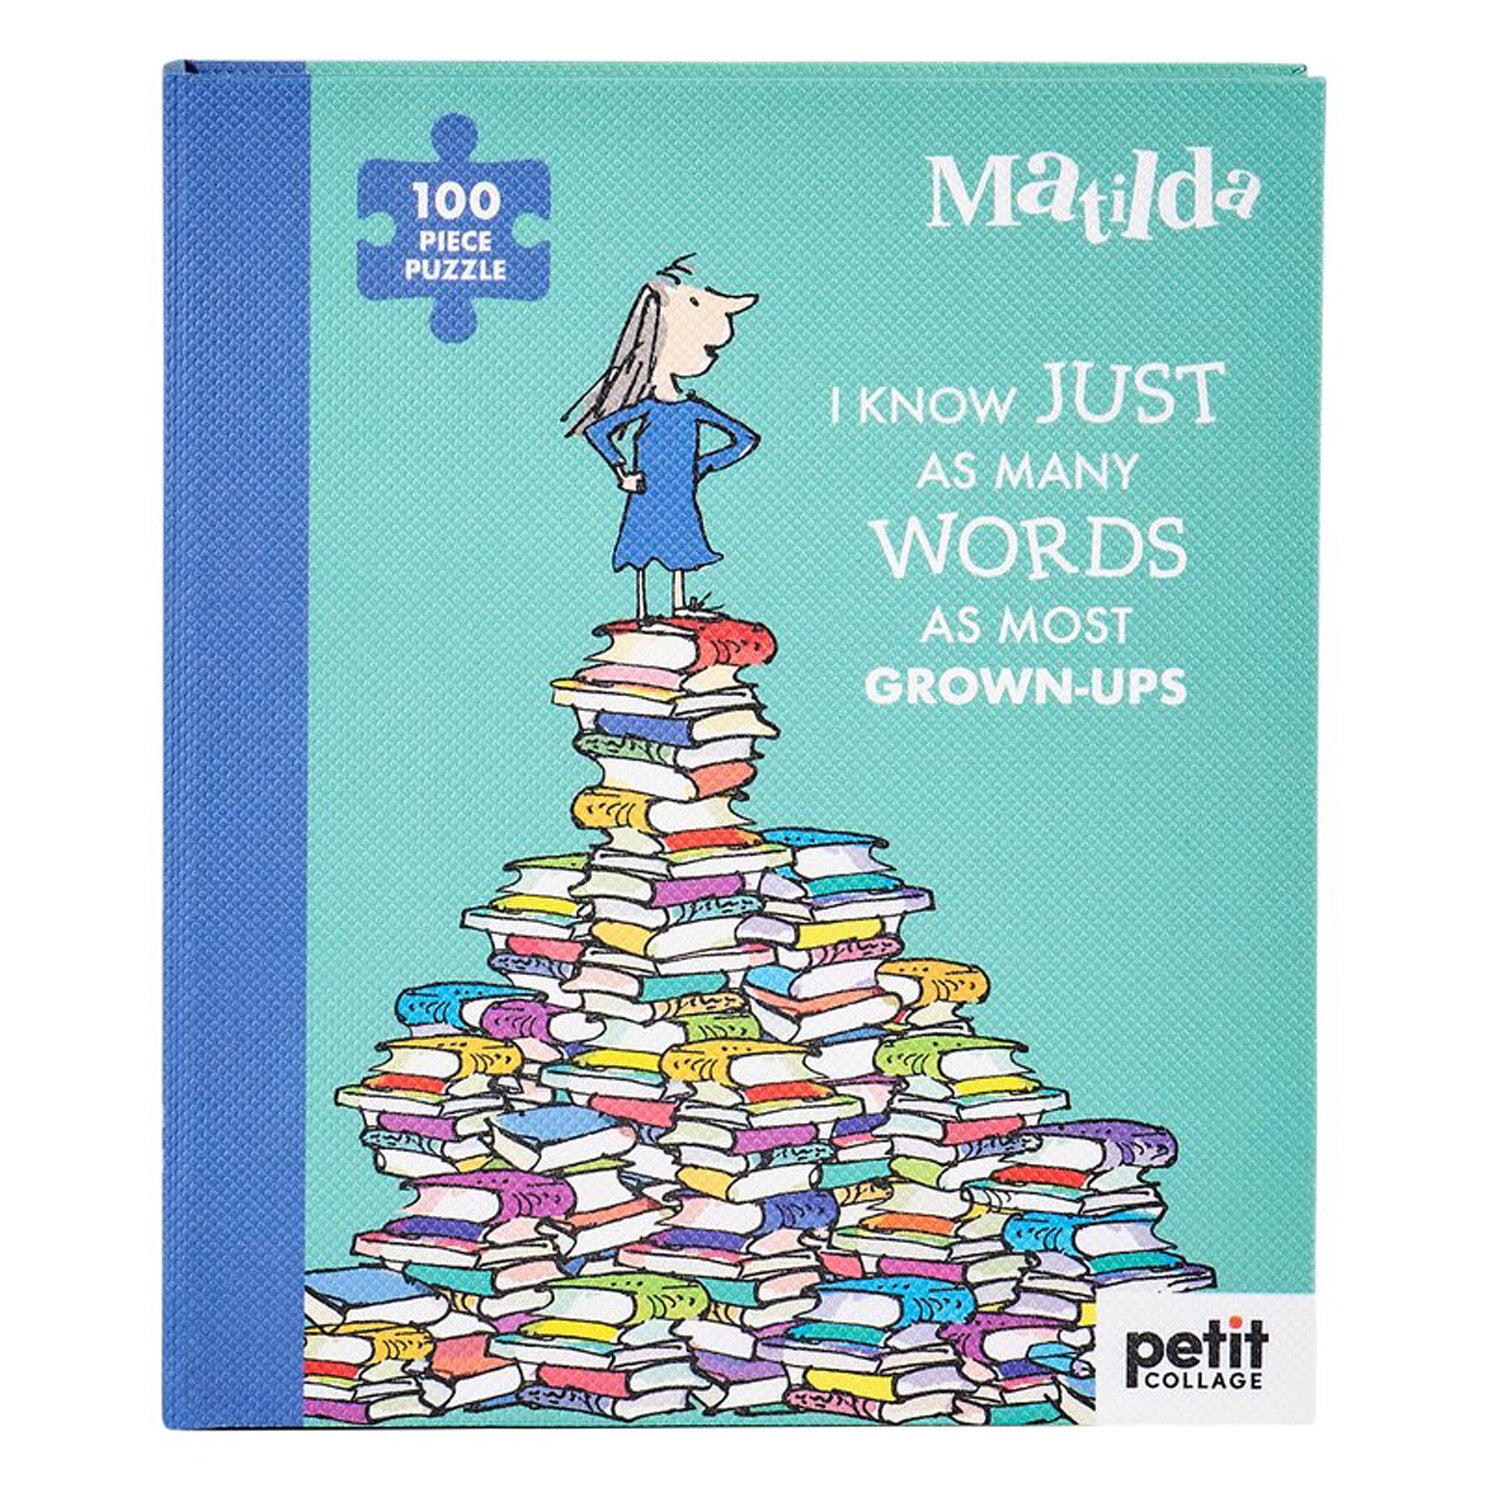 Matilda 100 piece puzzle from Roald Dahl and Quentin Blake